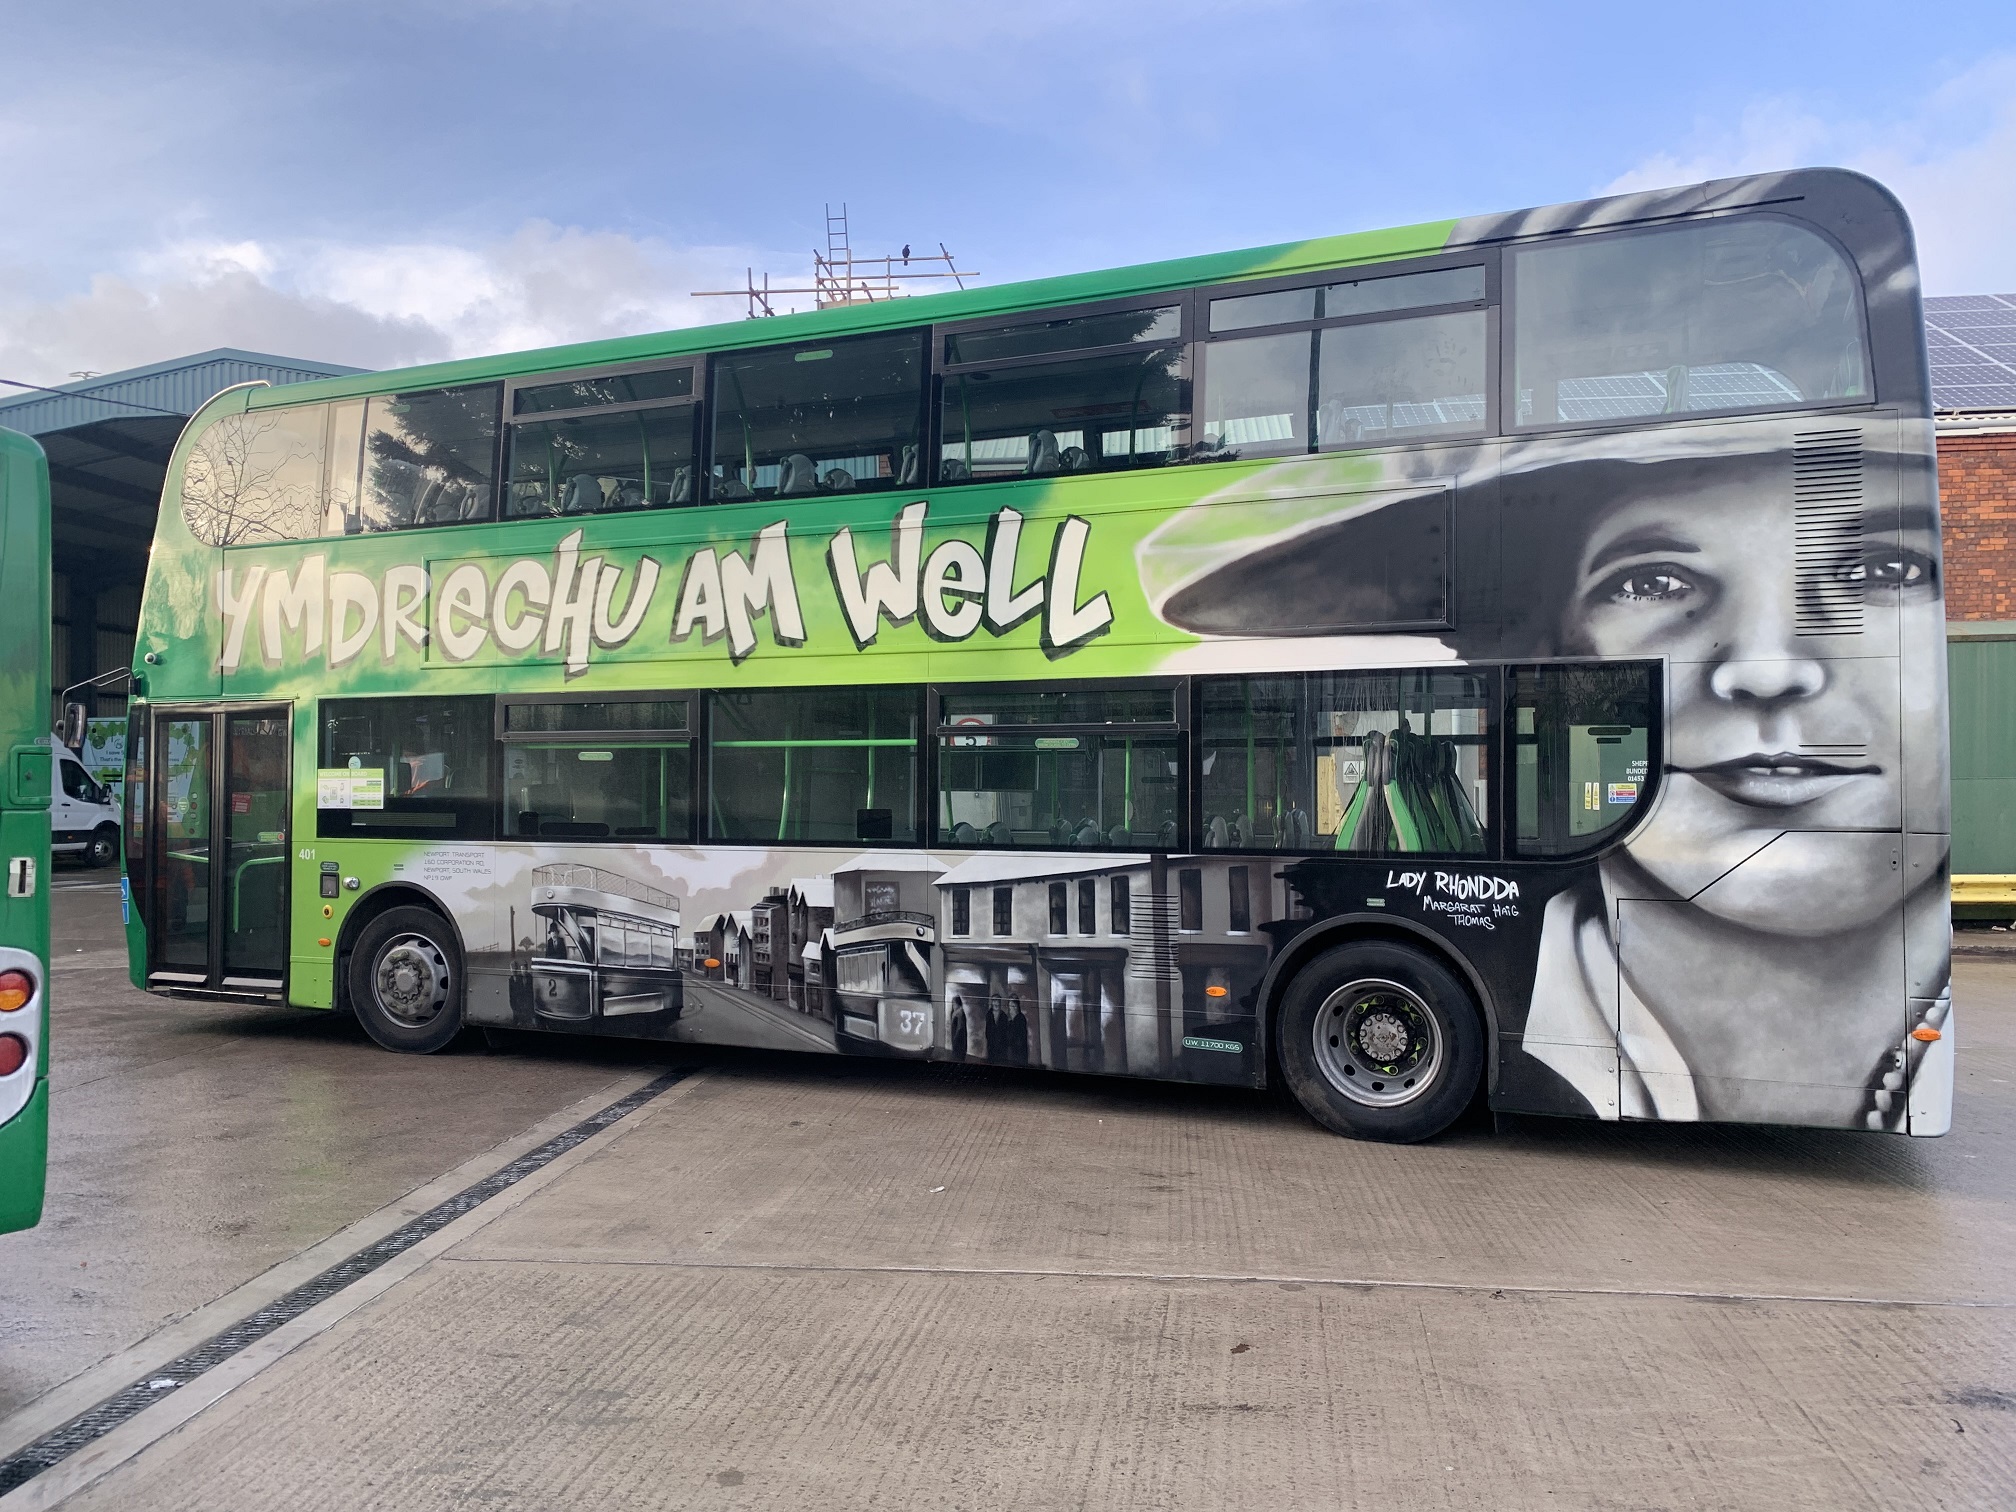 Newport Transport bus in scheme to honour city history